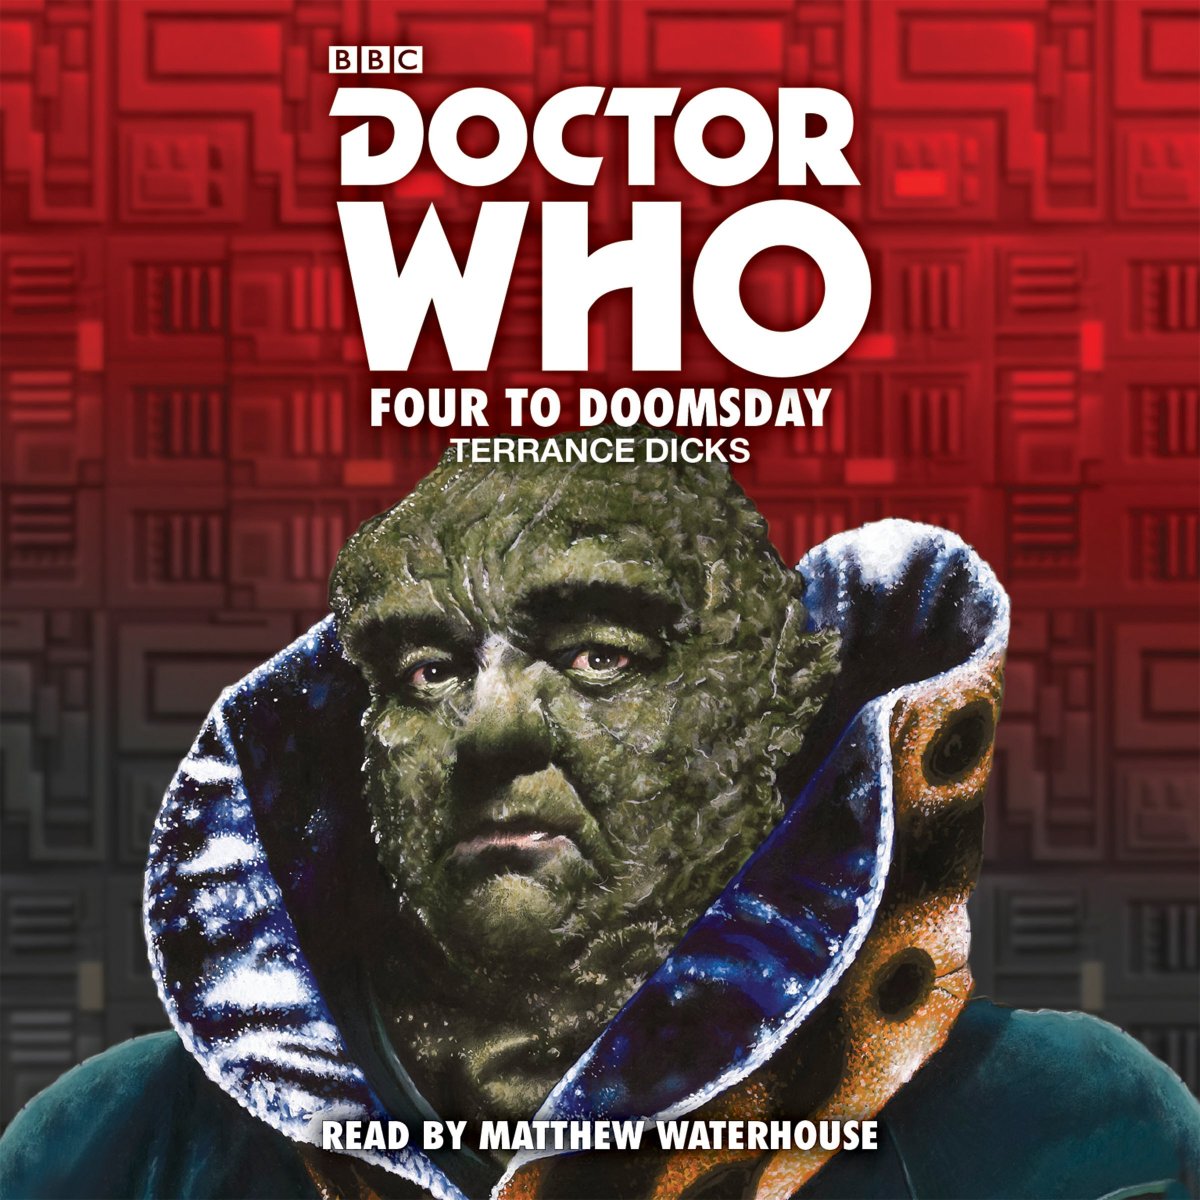 Four to Doomsday by Alister Pearson